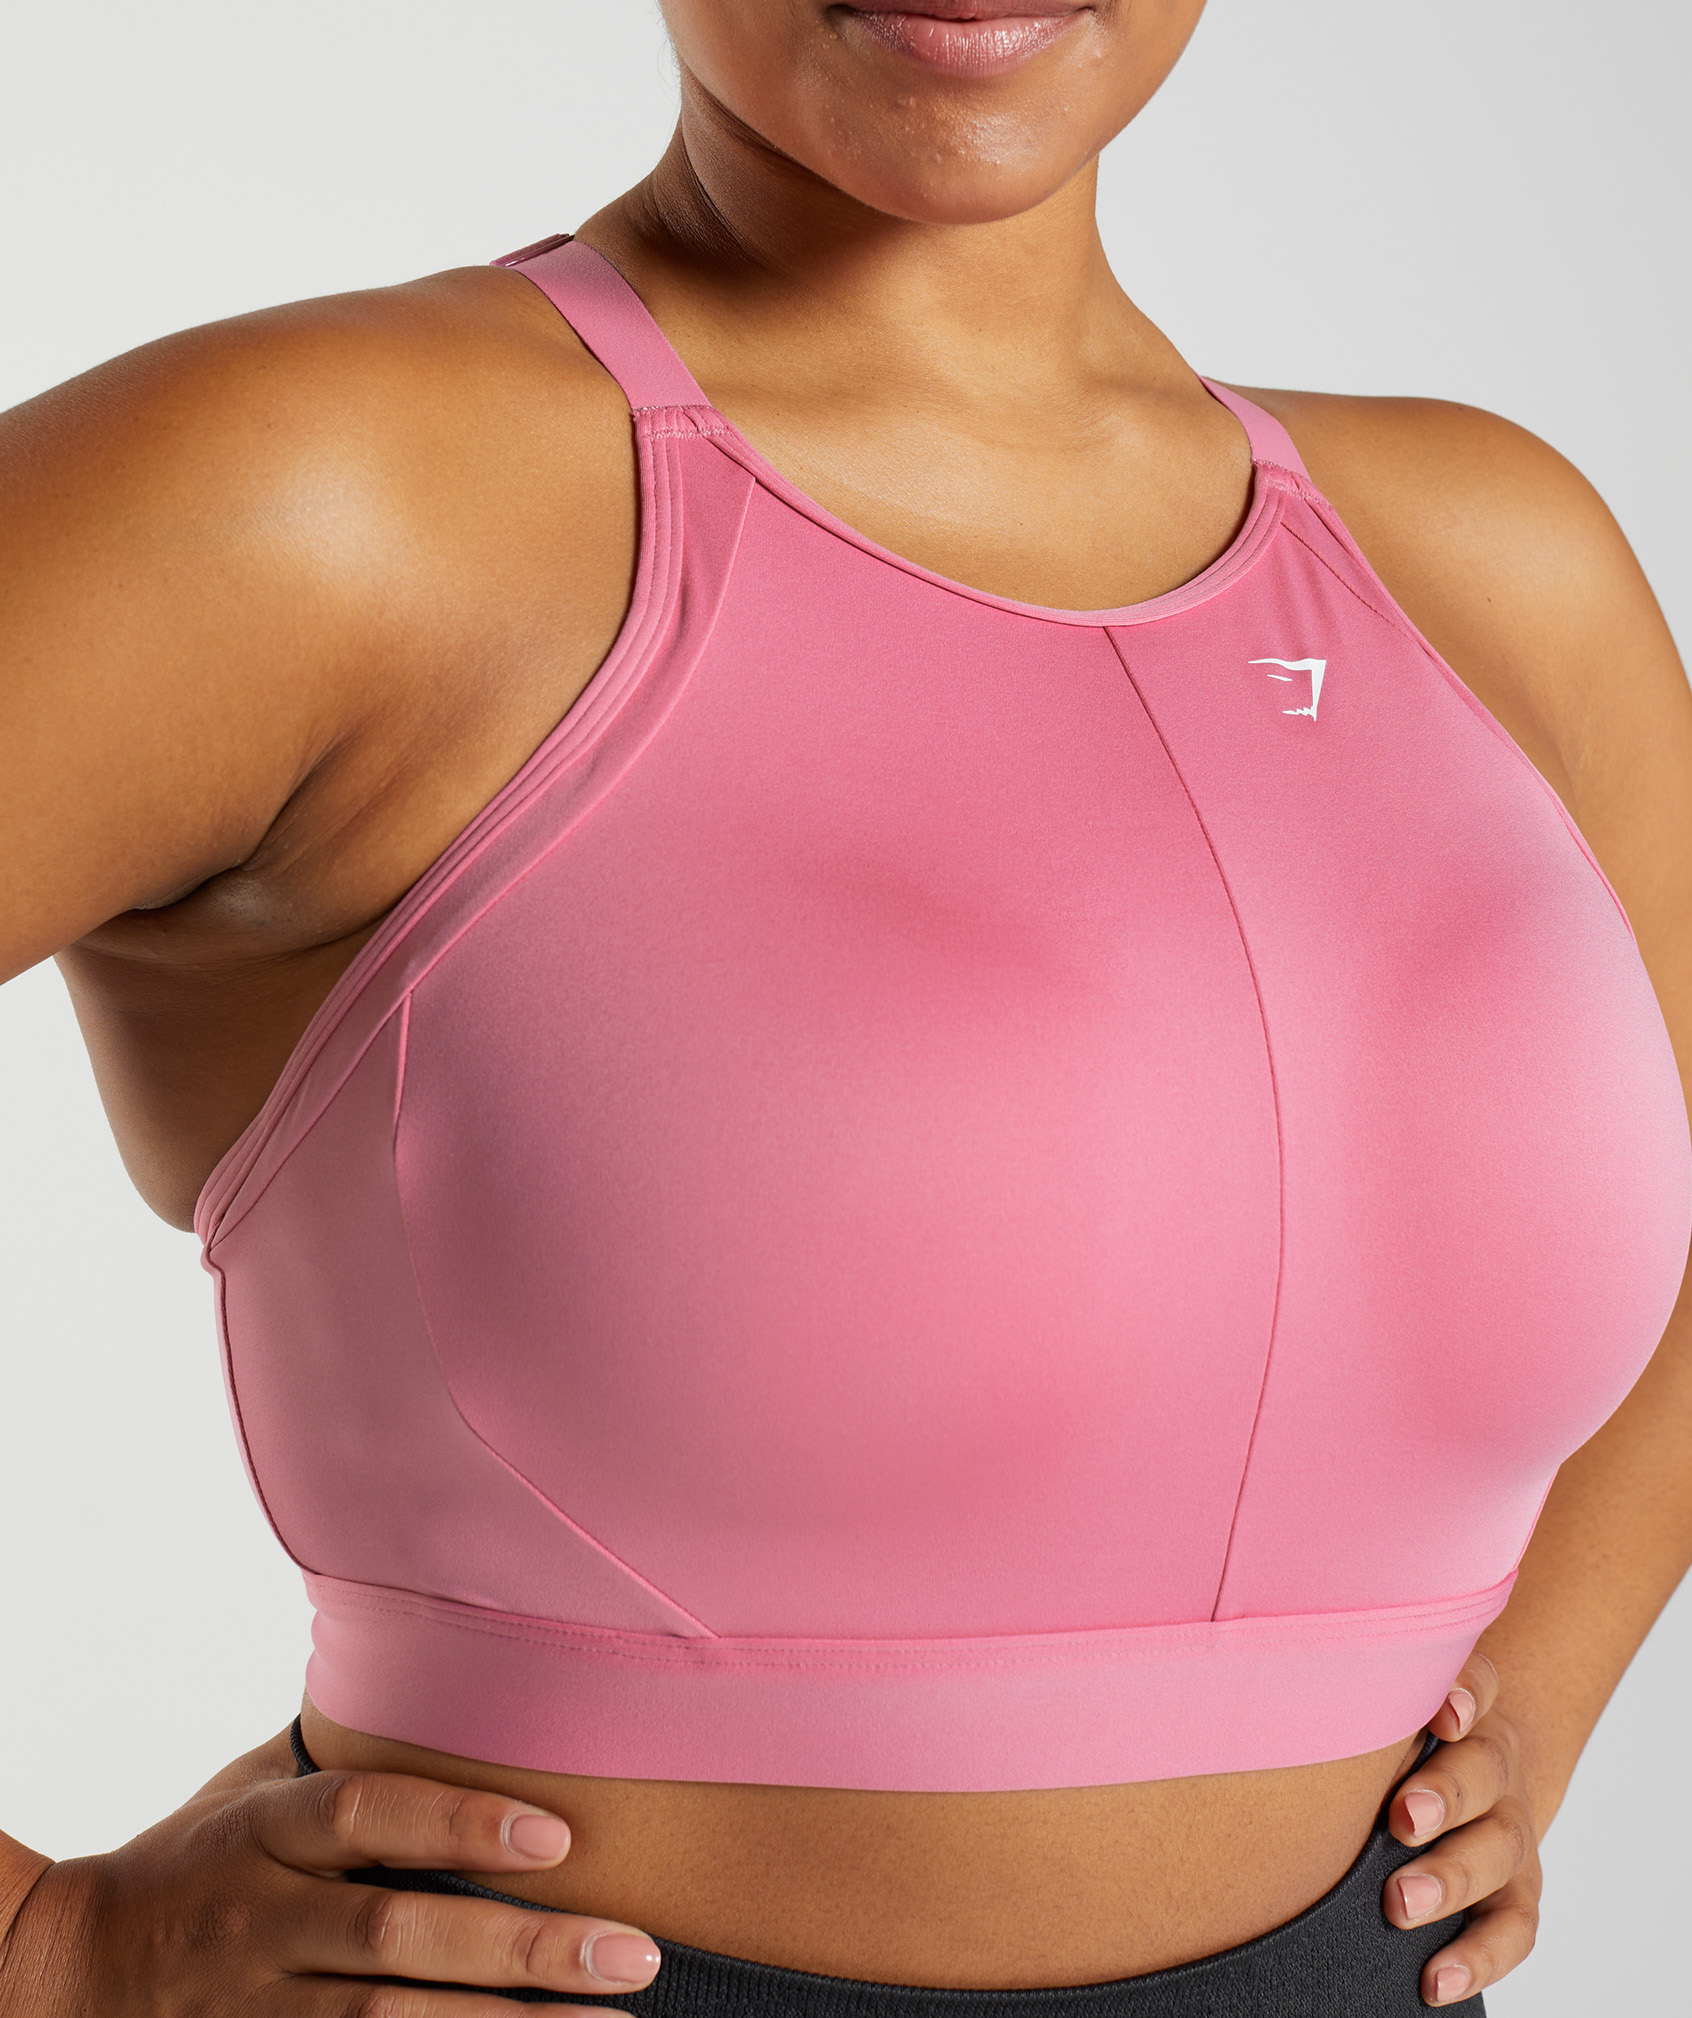 Types Of Sports Bras - How To Find The Right Support Level For You